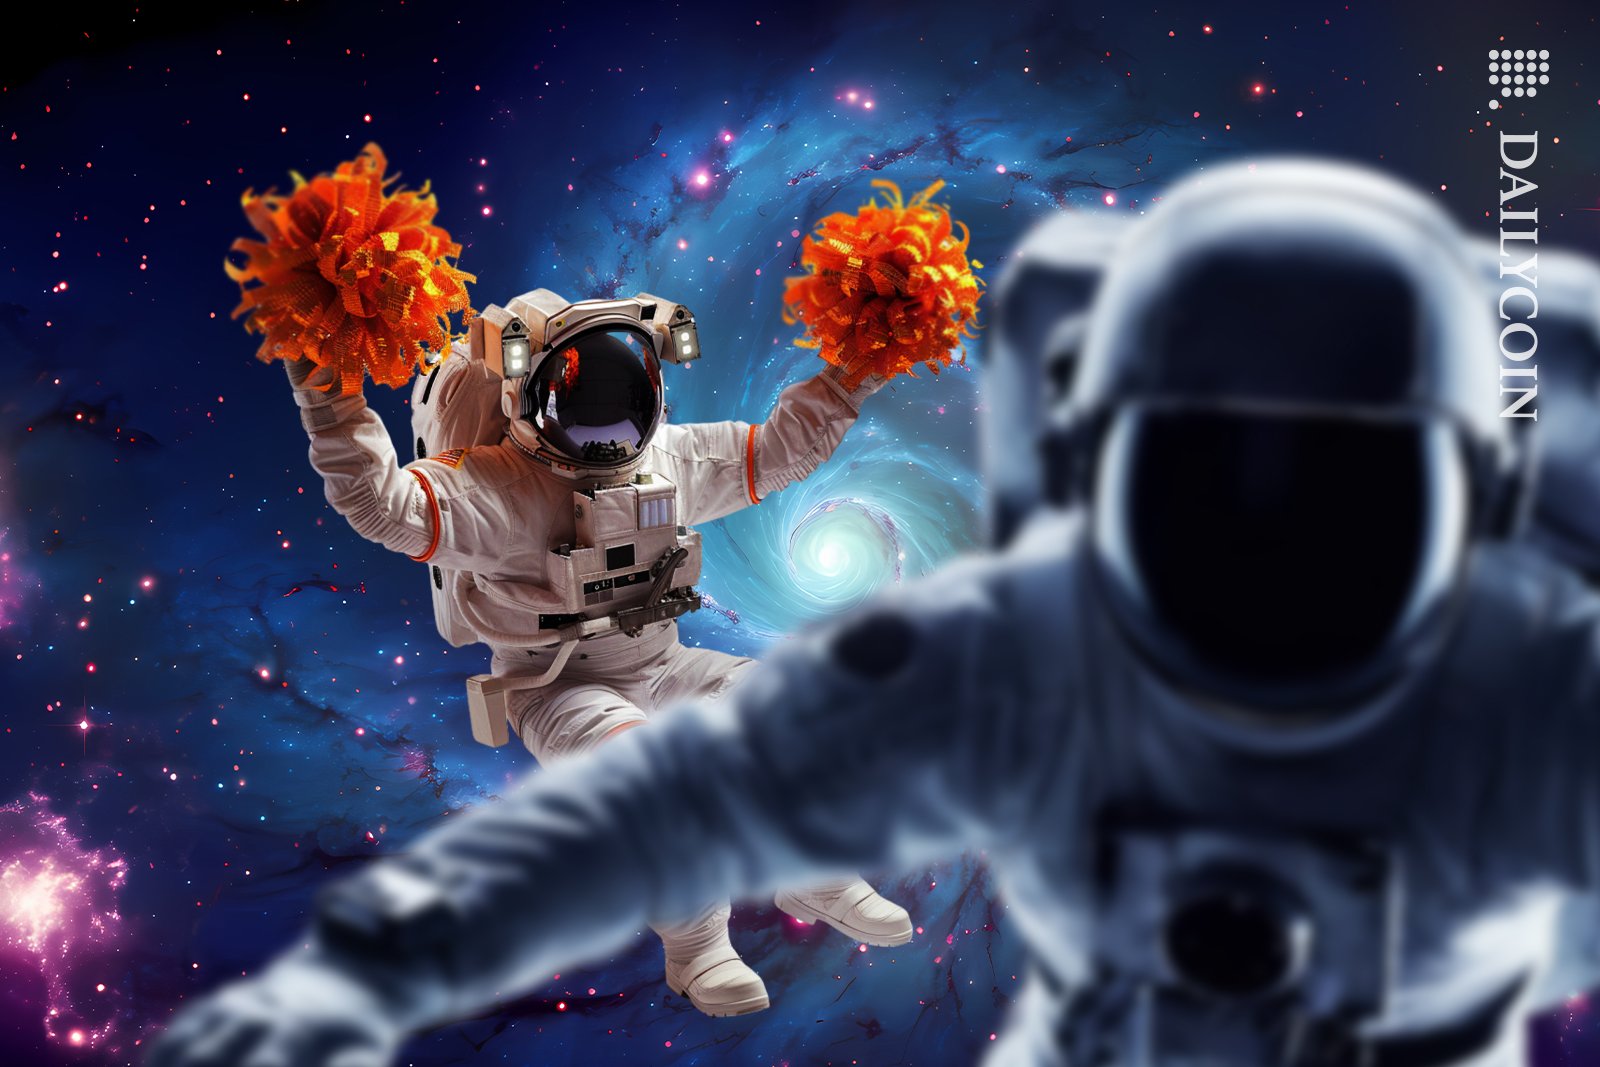 Space man taking a selfie with his collegue celebrating in the milky way.